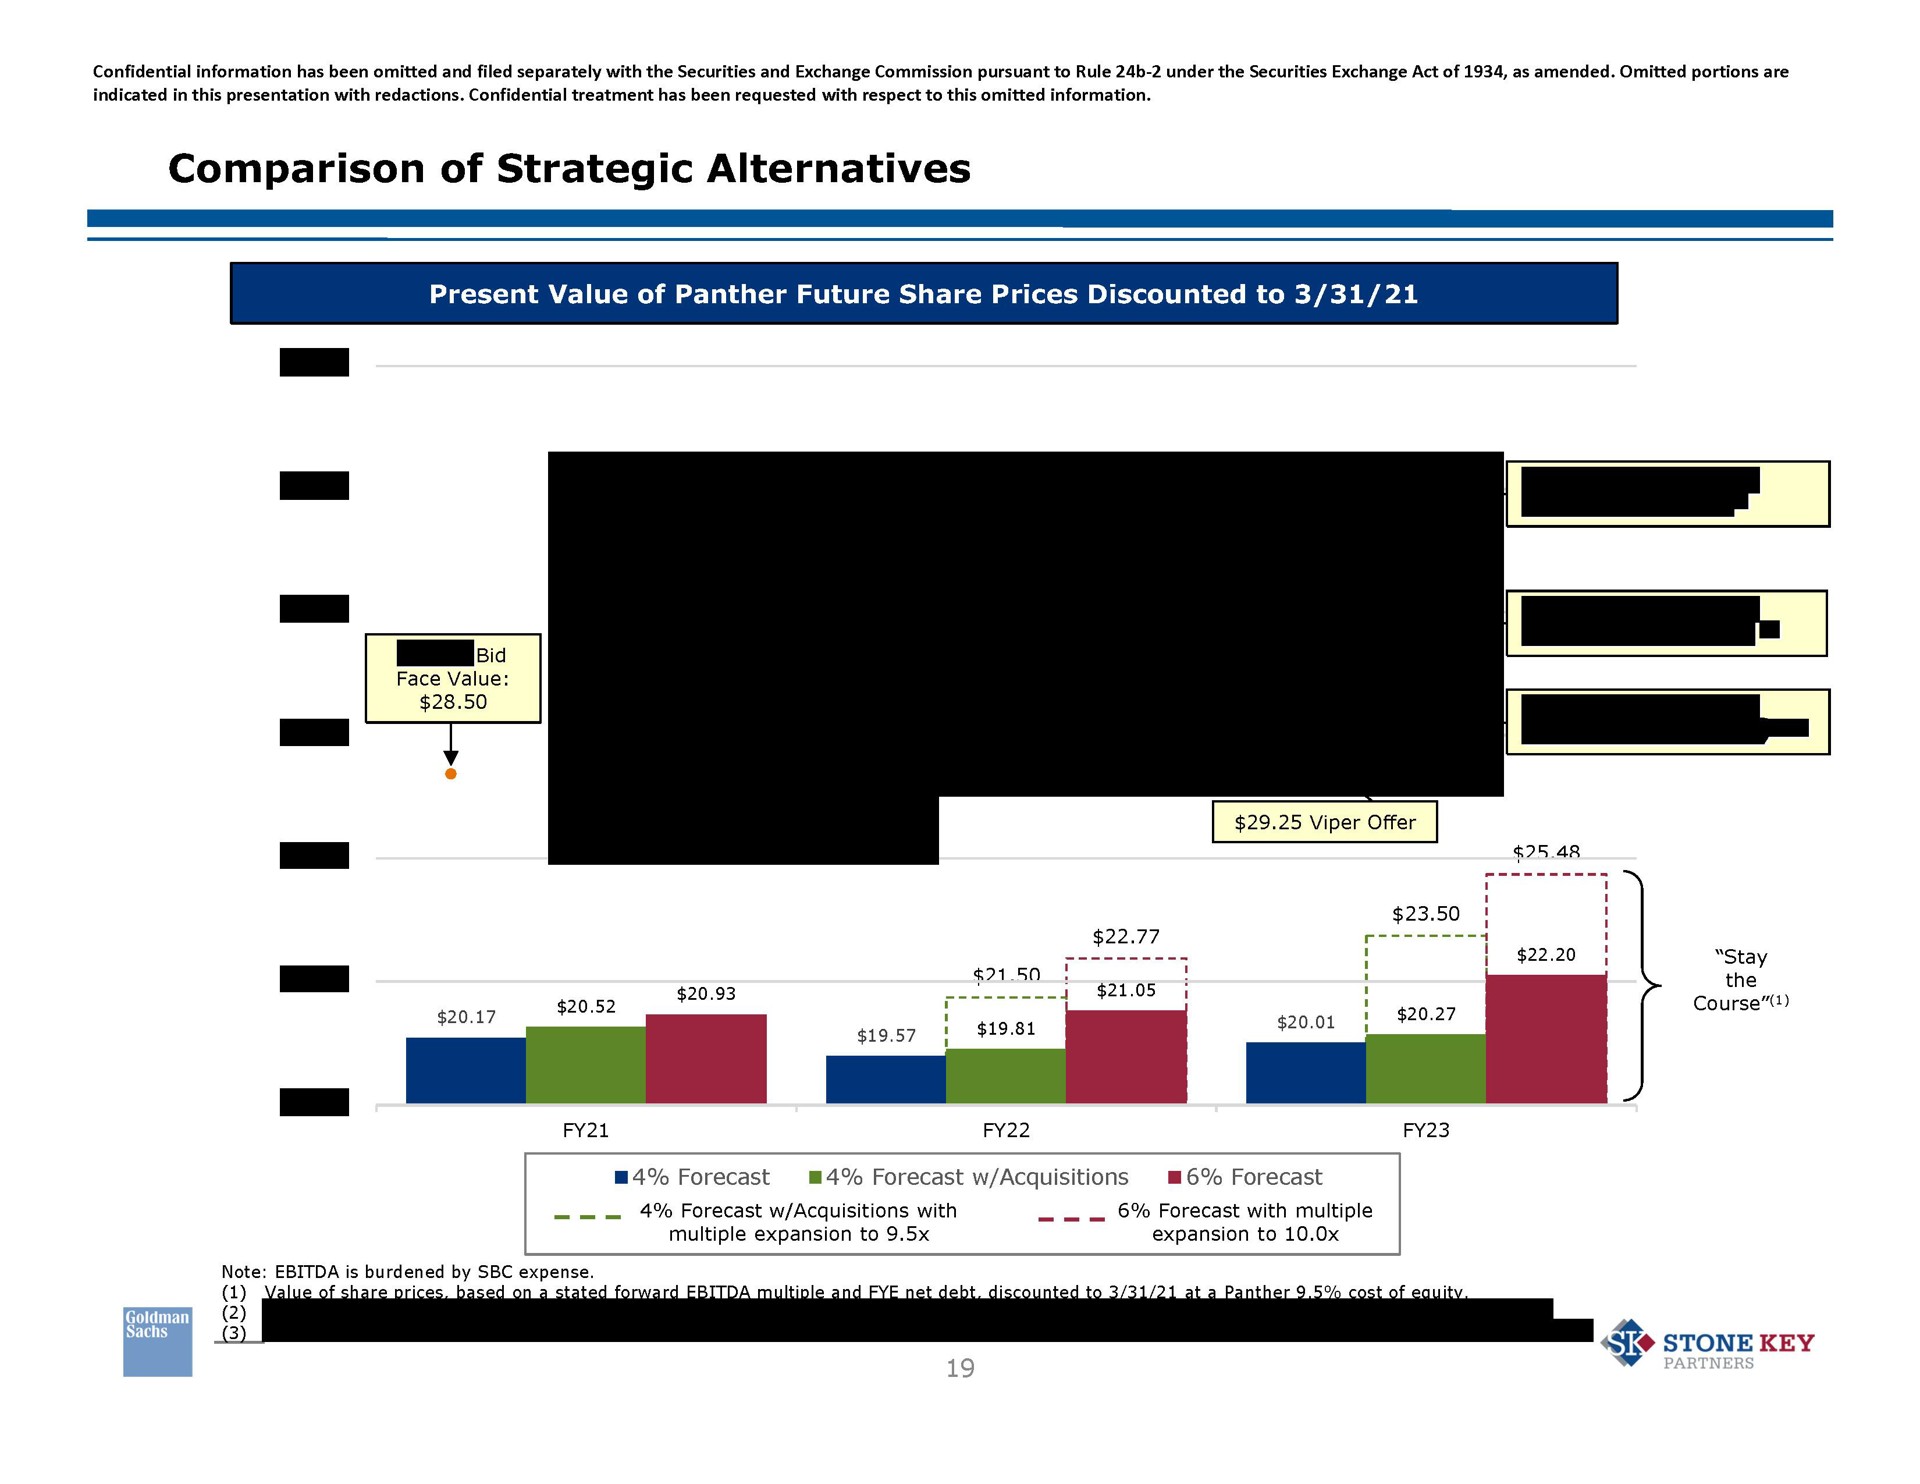 comparison of strategic alternatives present value of panther future share prices discounted to me sic go stay course forecast forecast acquisitions forecast value of share prices stone key | Goldman Sachs